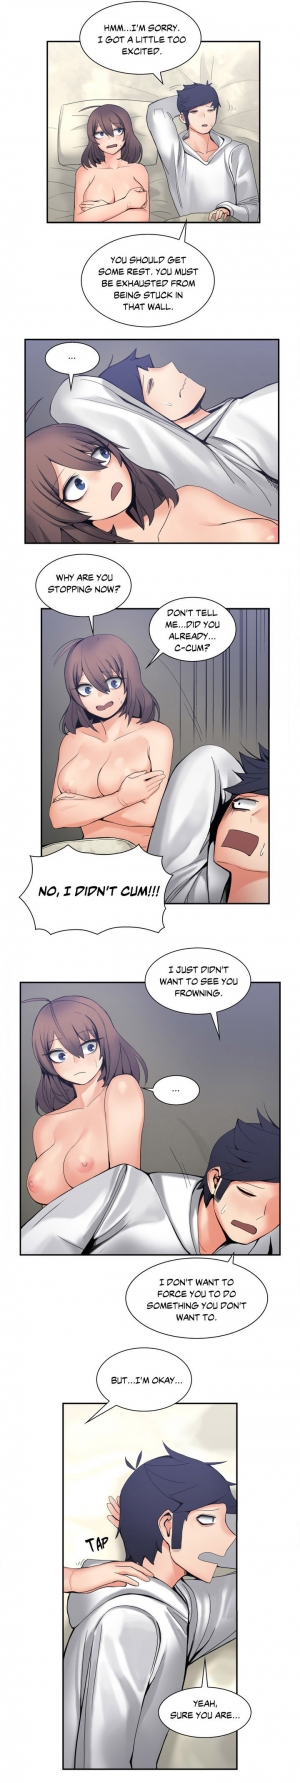 [Gaehoju, Gunnermul] The Girl That Got Stuck in the Wall Ch.11/11 [COMPLETED] [English] [Hentai Universe] - Page 128